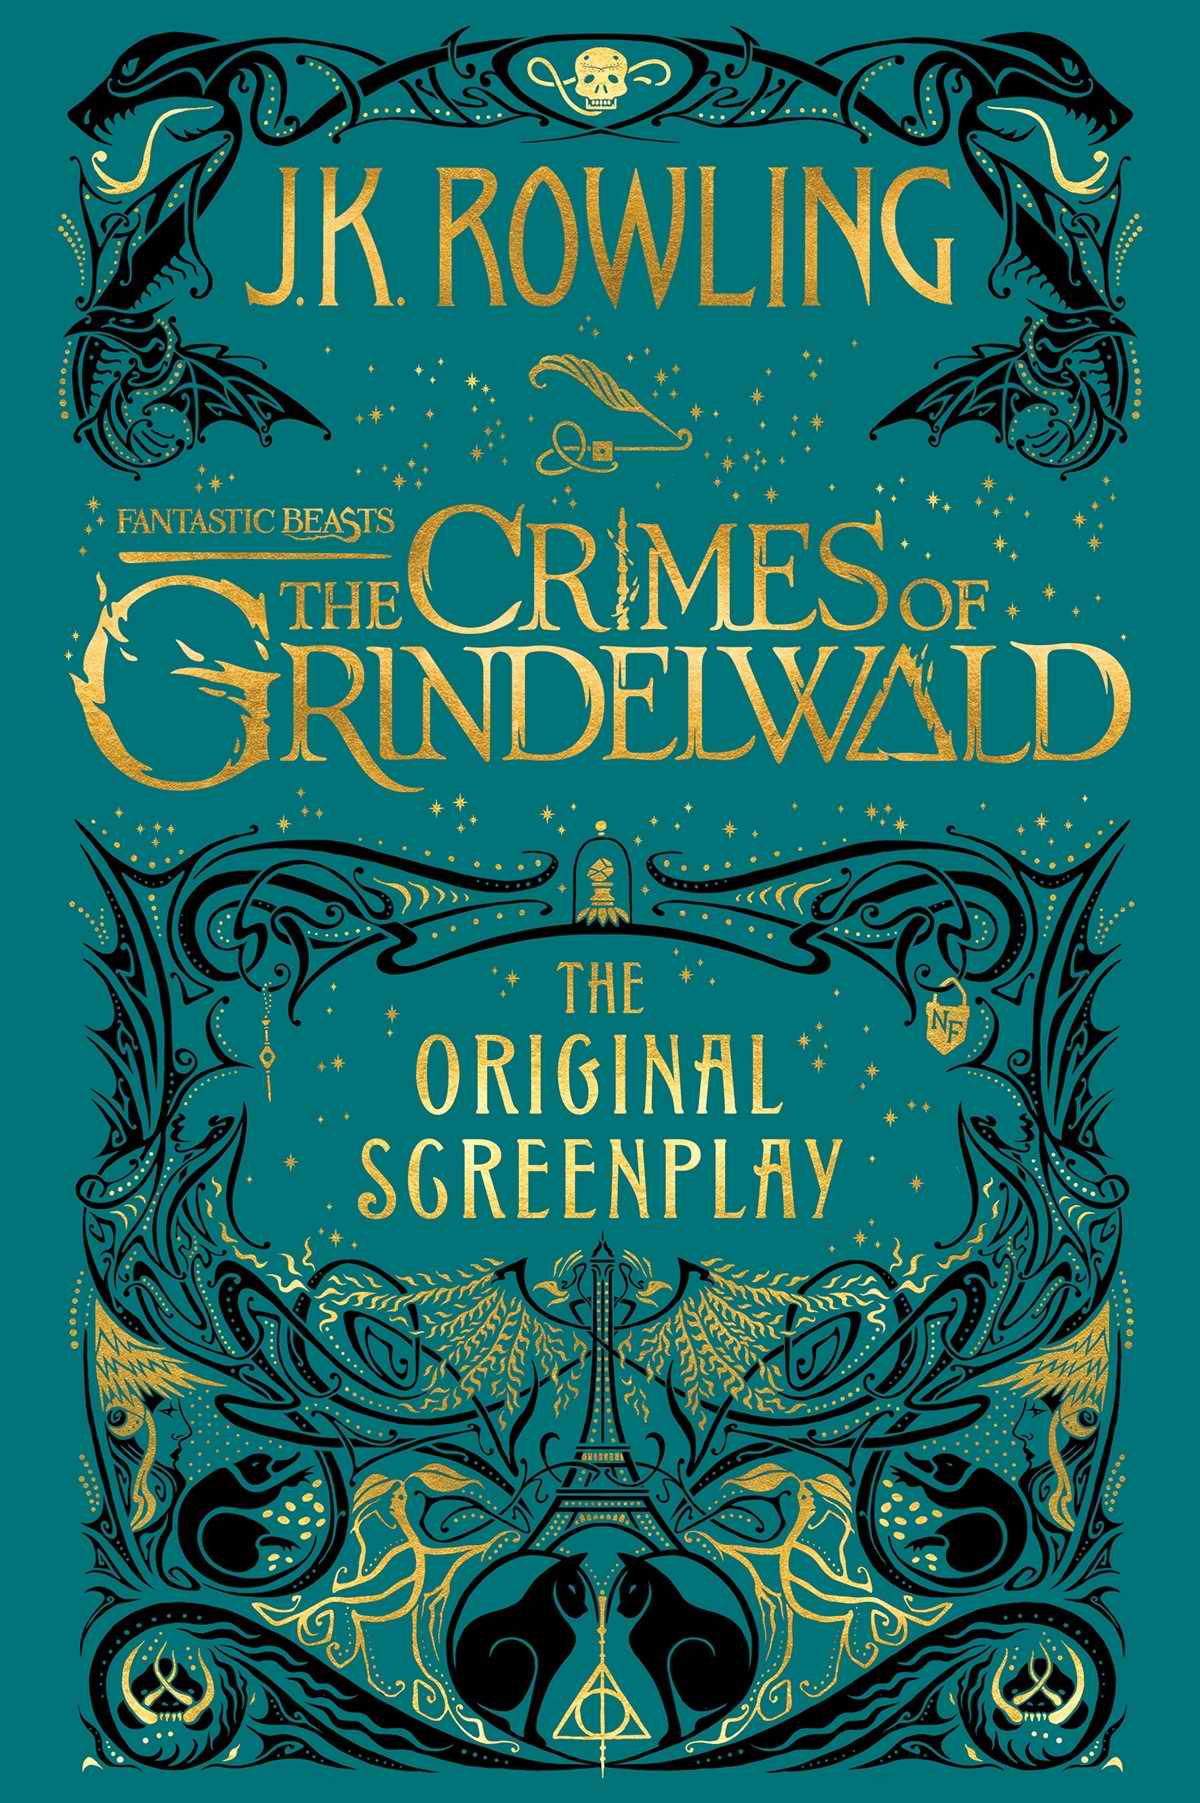 Fantastic Beasts：The Crimes of Grindelwald - The Original Screenplay